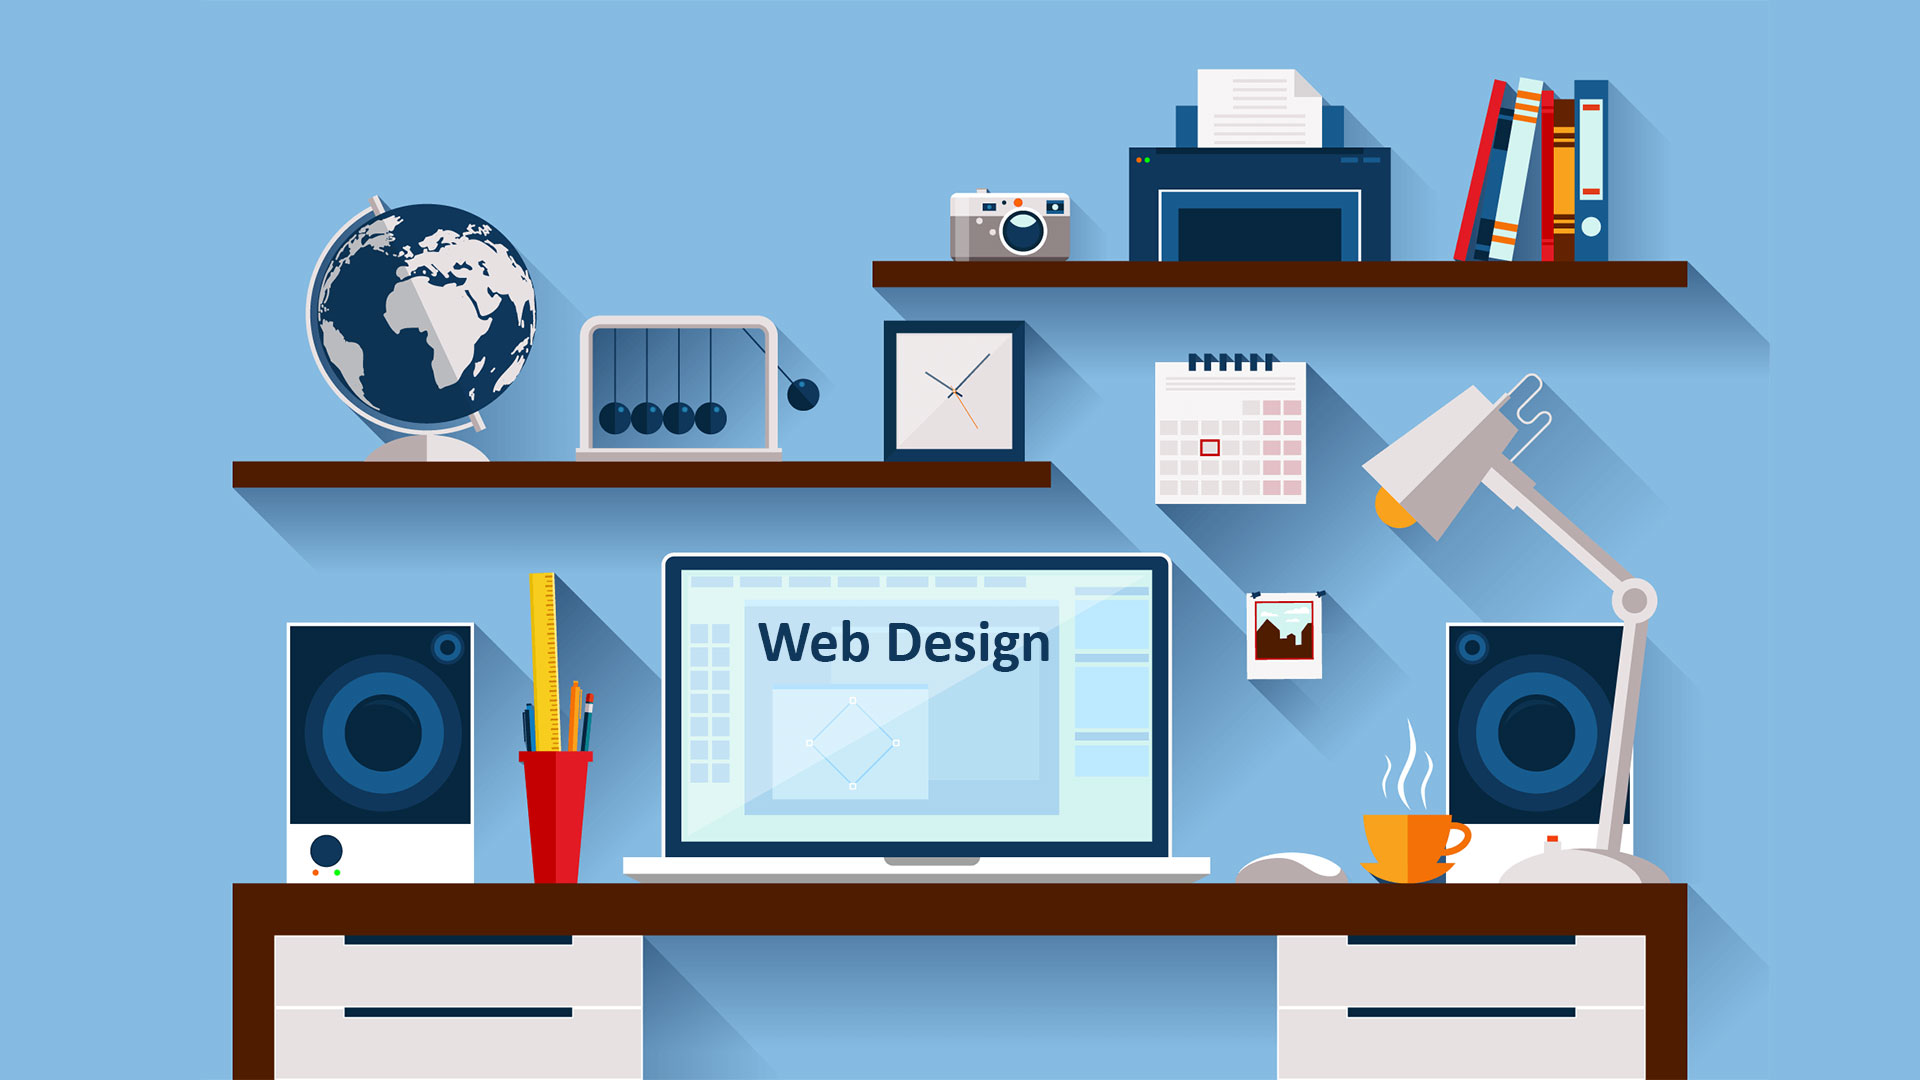 Best SEO Tips To Enhance Your Web Design